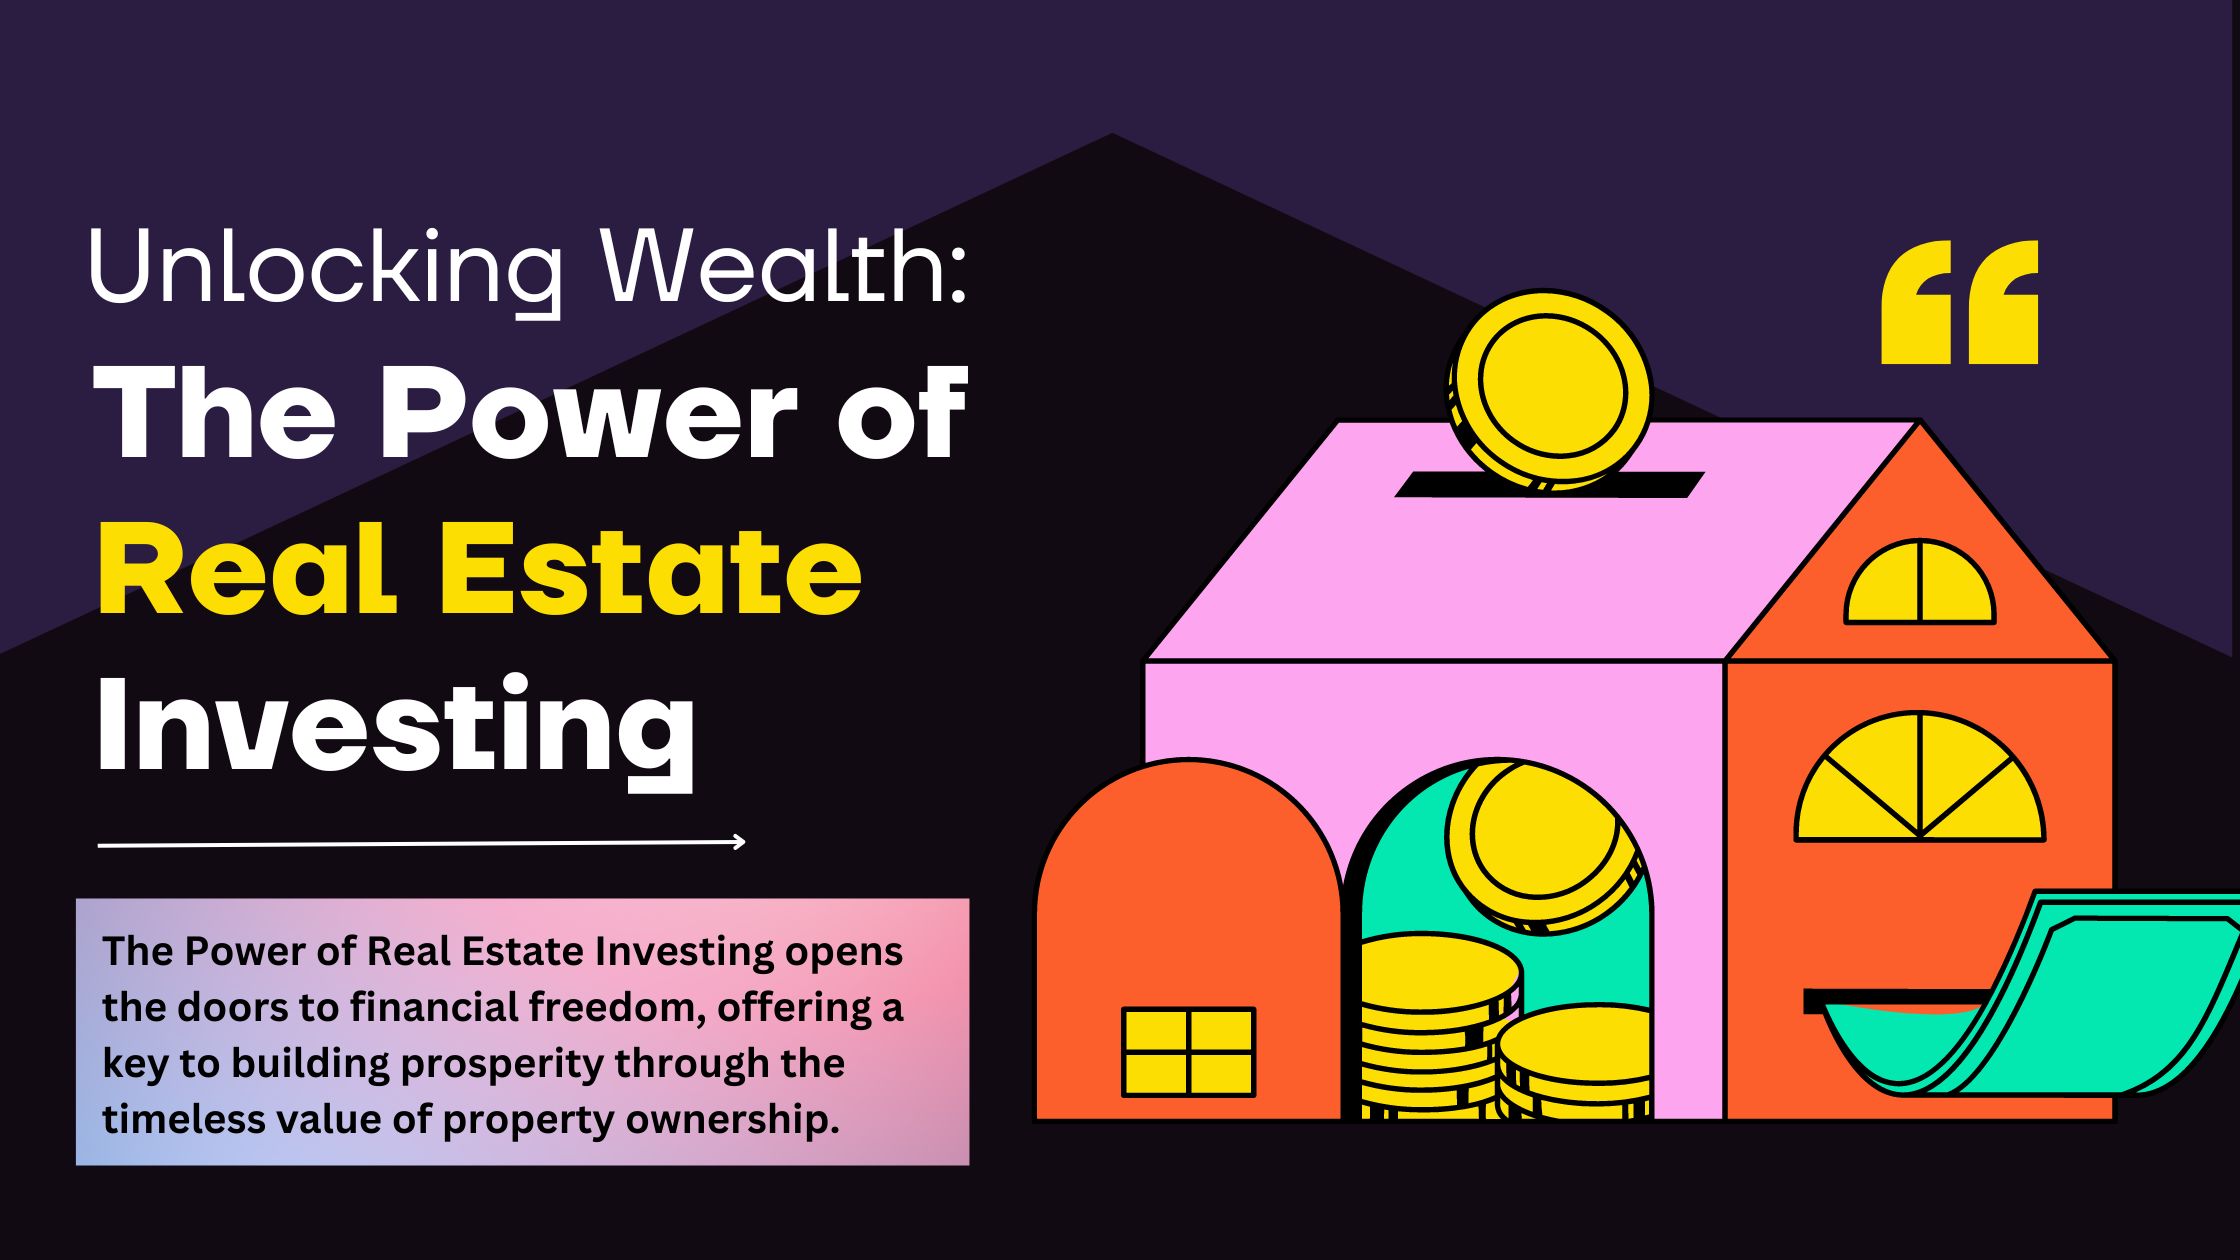 Imran Aghair Explains the Power of Real Estate Investing